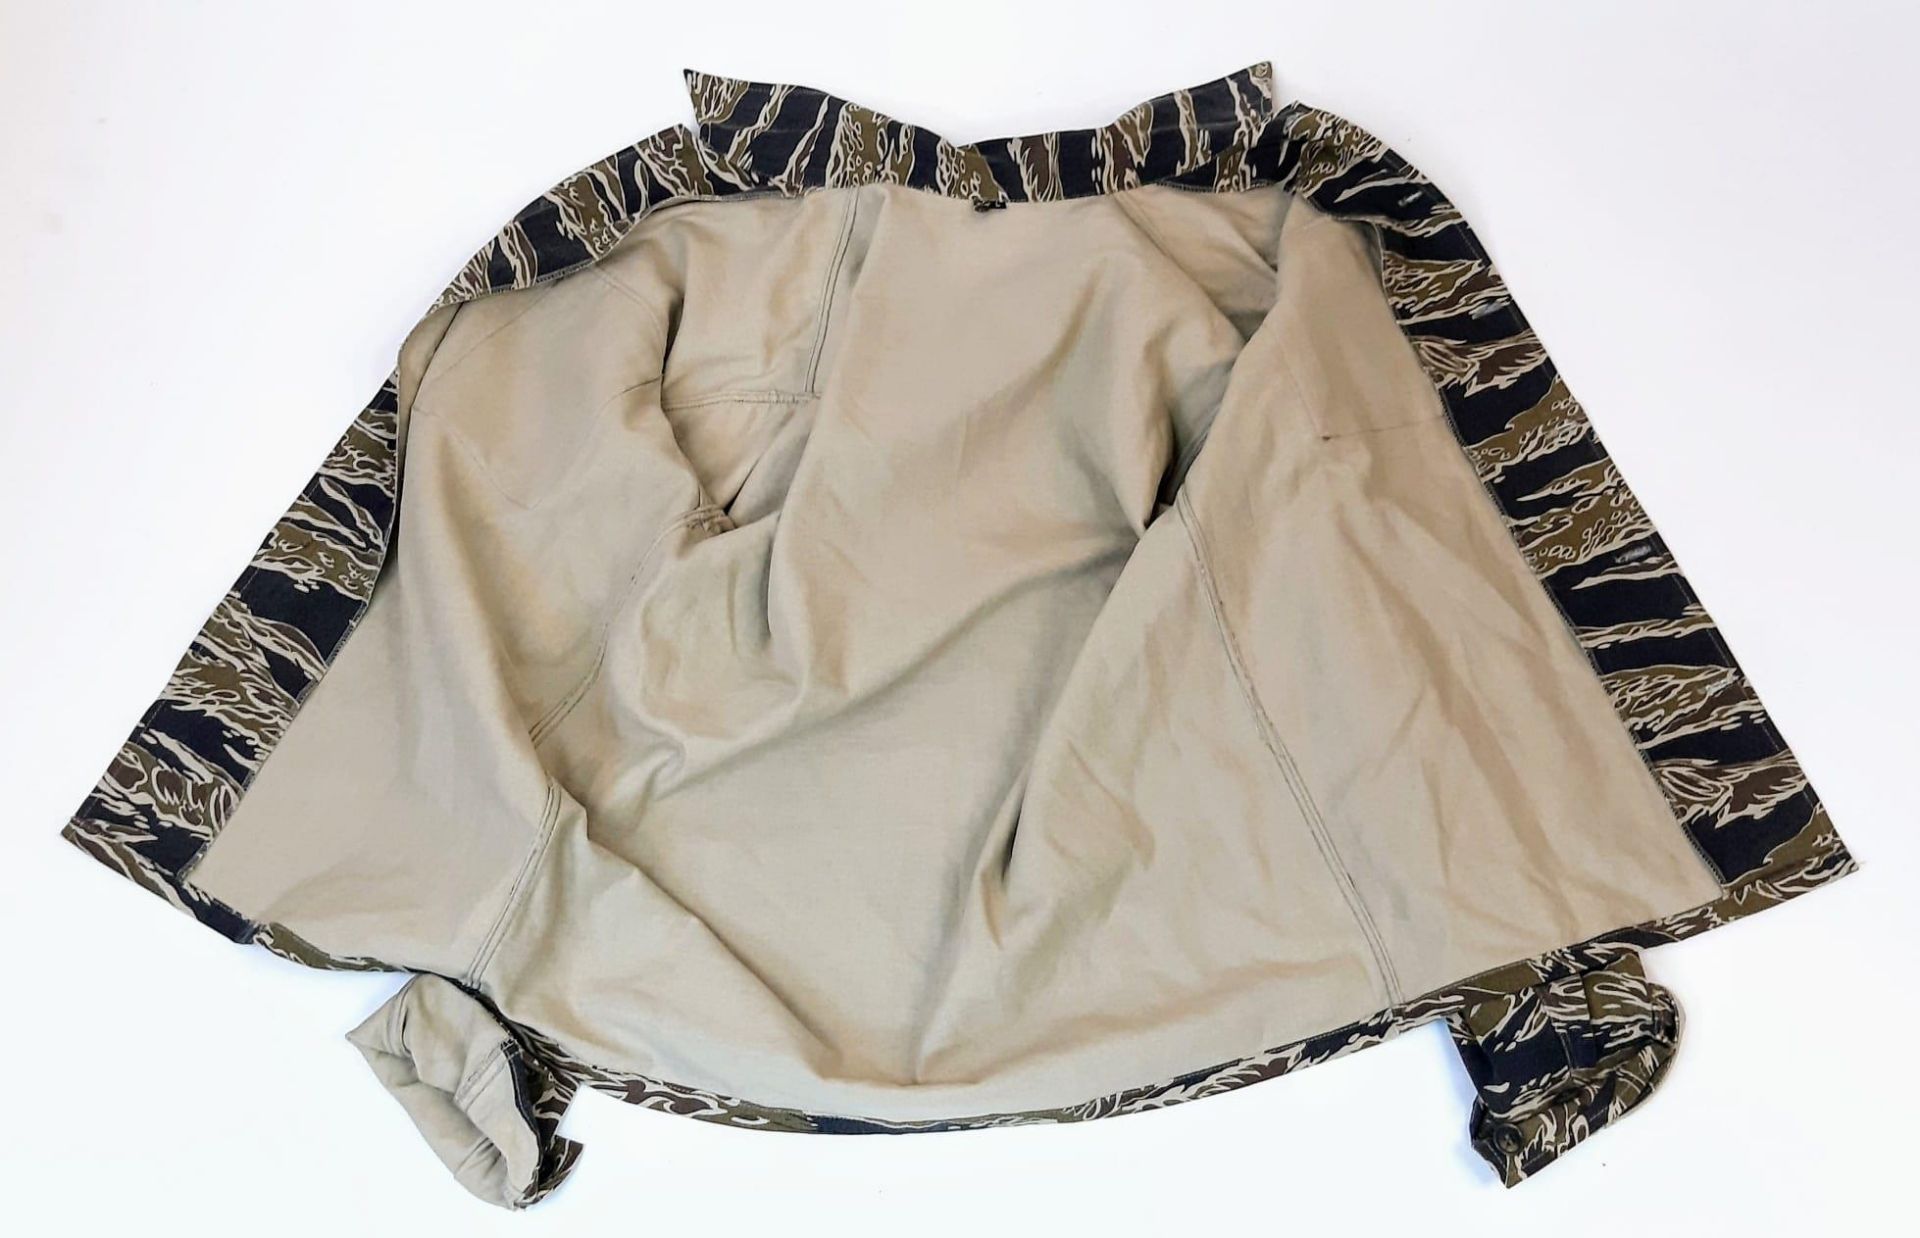 Tiger Stripe Combat Jacket & Trousers Quality Post War Vietnamese made from original fabric. - Image 5 of 5